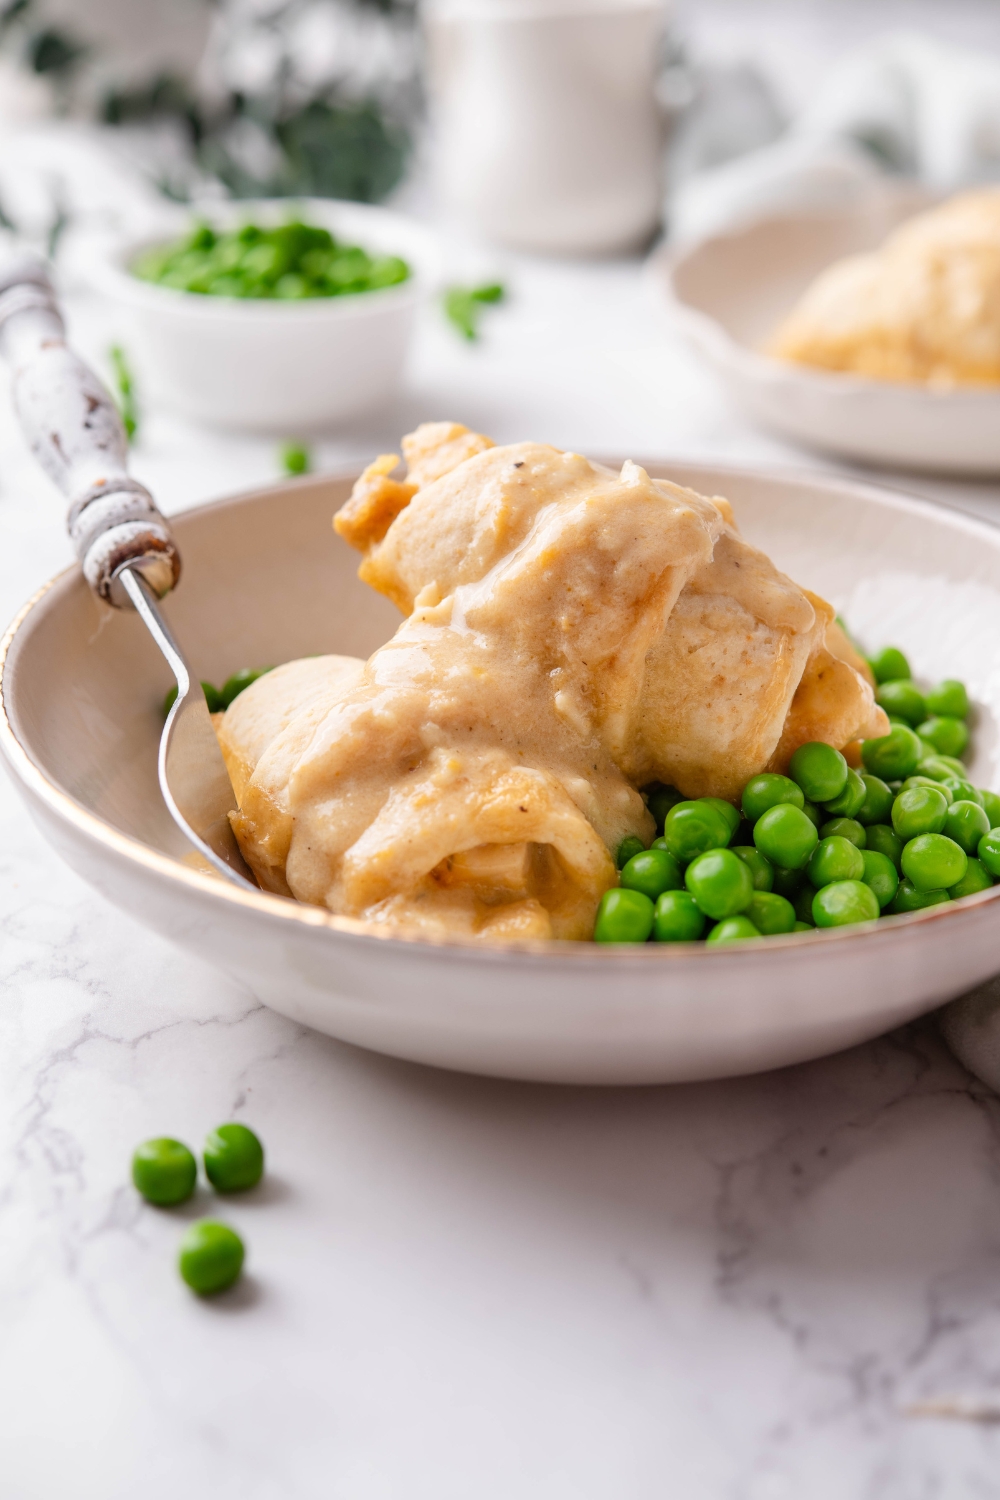 A bowl with two stuffed crescent rolls covered in cream sauce next to a pile of cooked green peas and a fork is in the bowl.